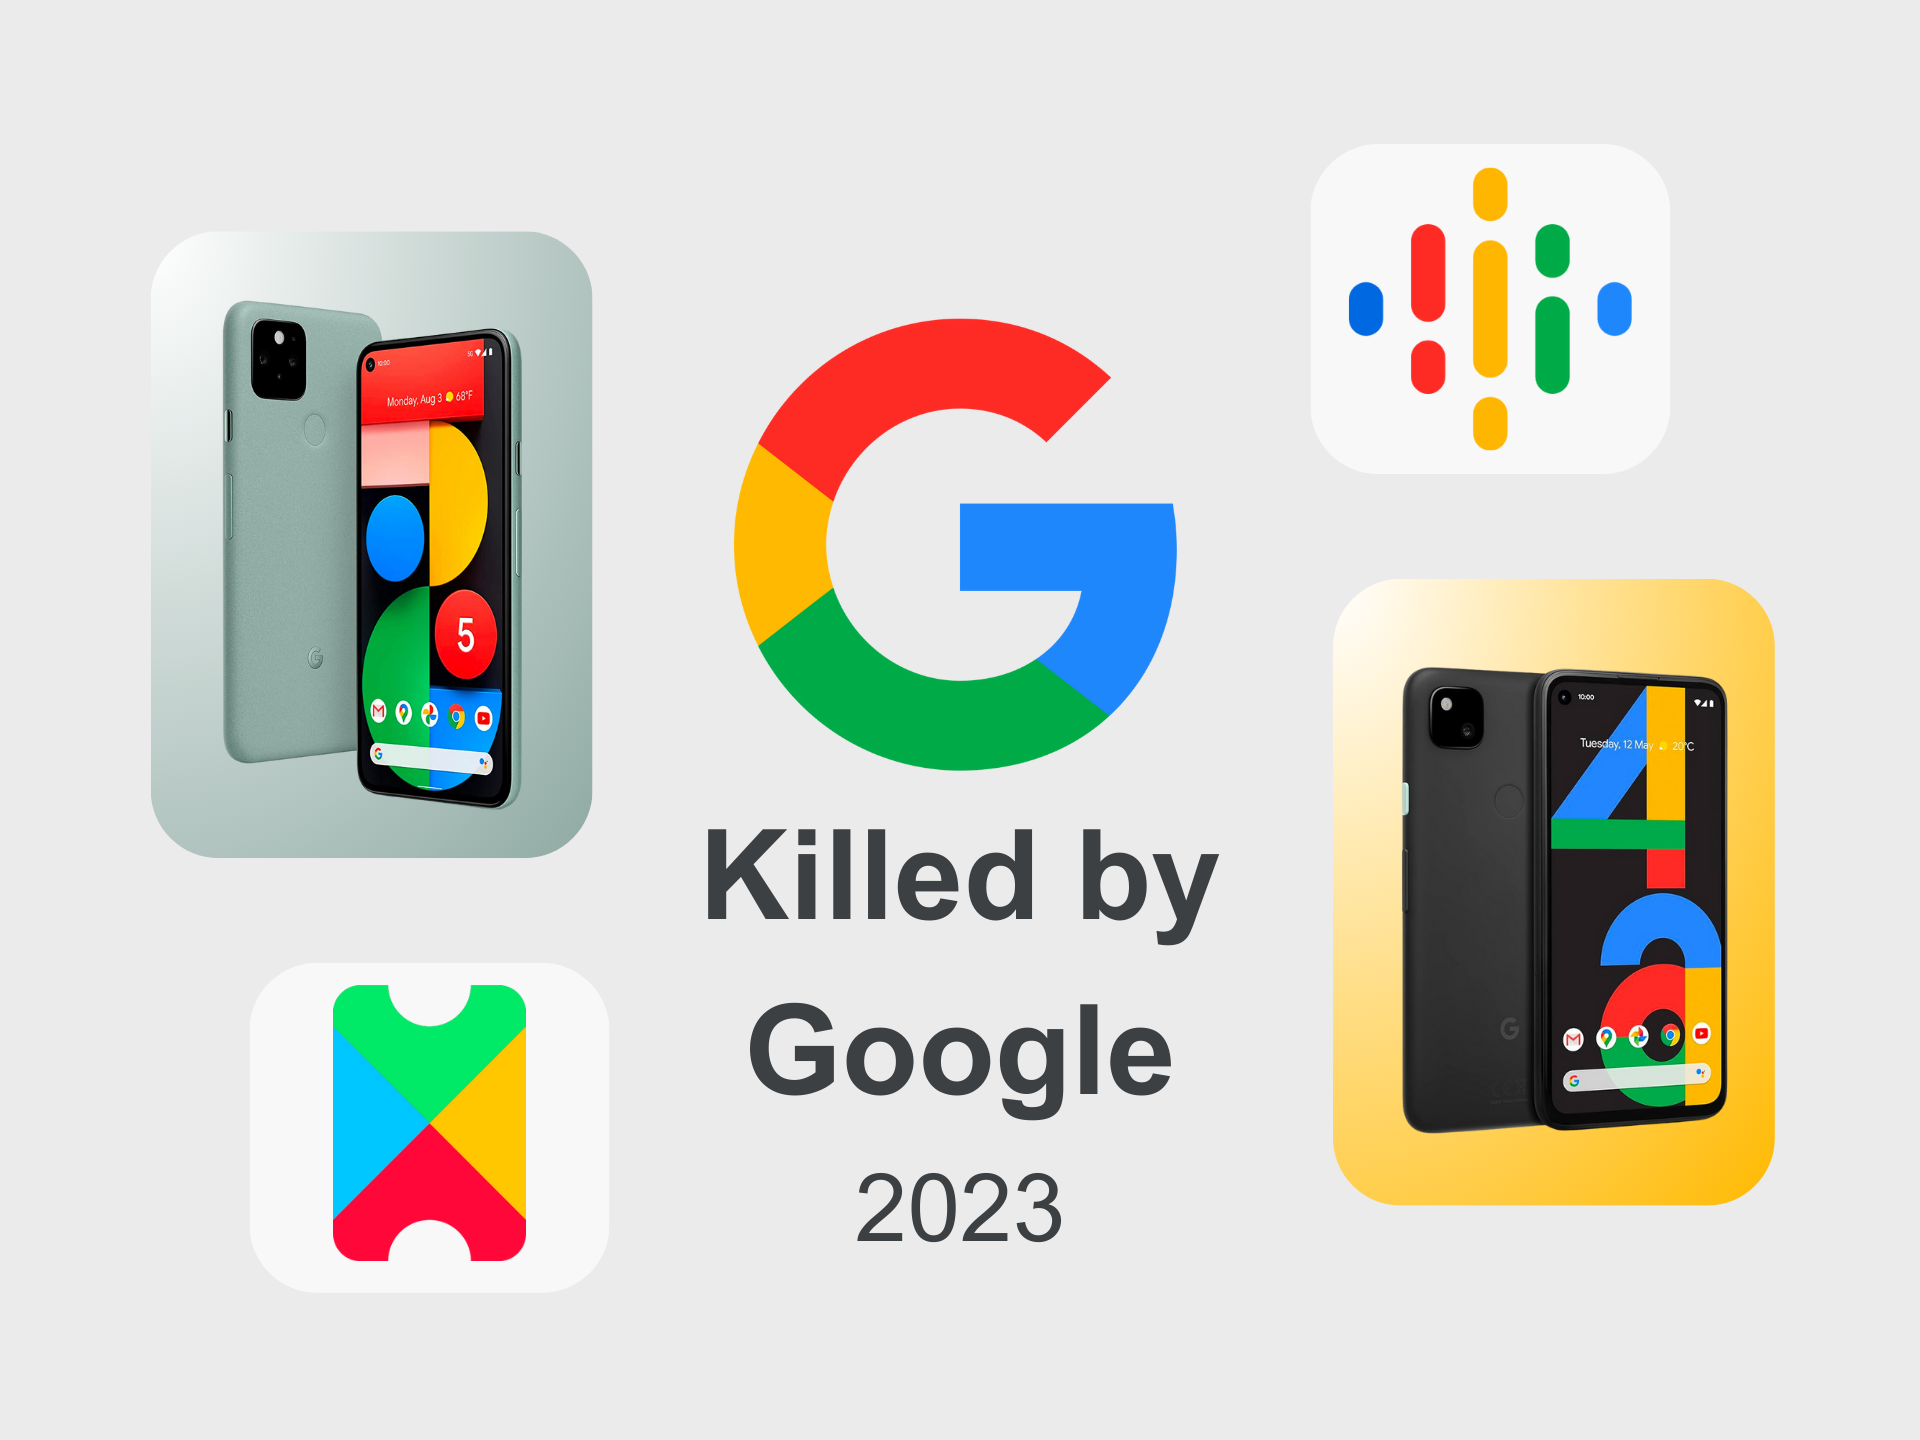 li-7 products and services that Google discontinued in 2023-killed-by-google